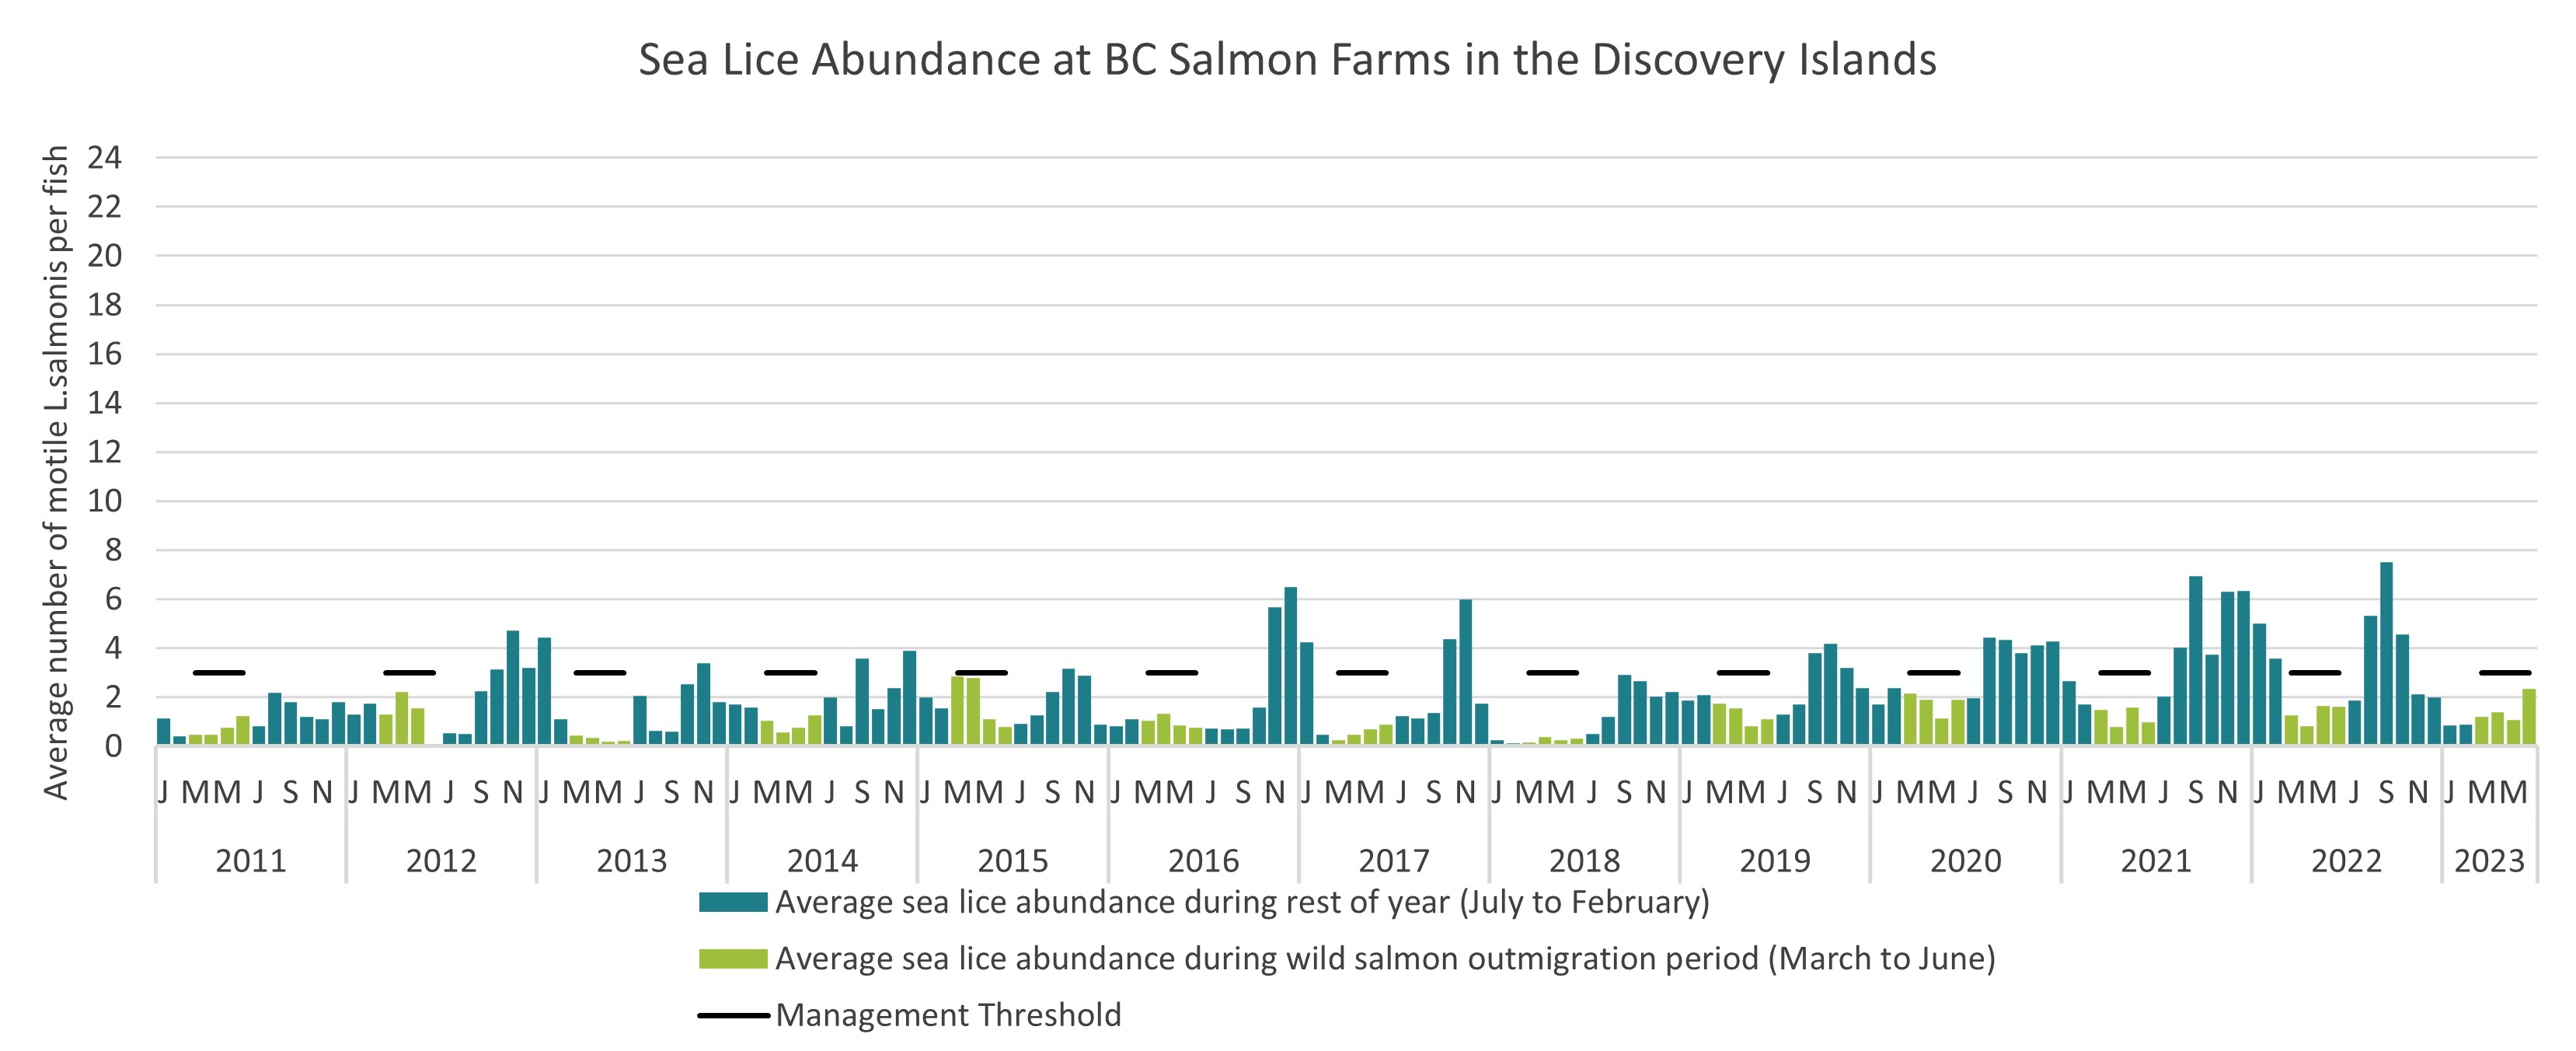 Sea Lice Abundance at BC Salmon Farms in the Discovery Islands, 2011 to 2022